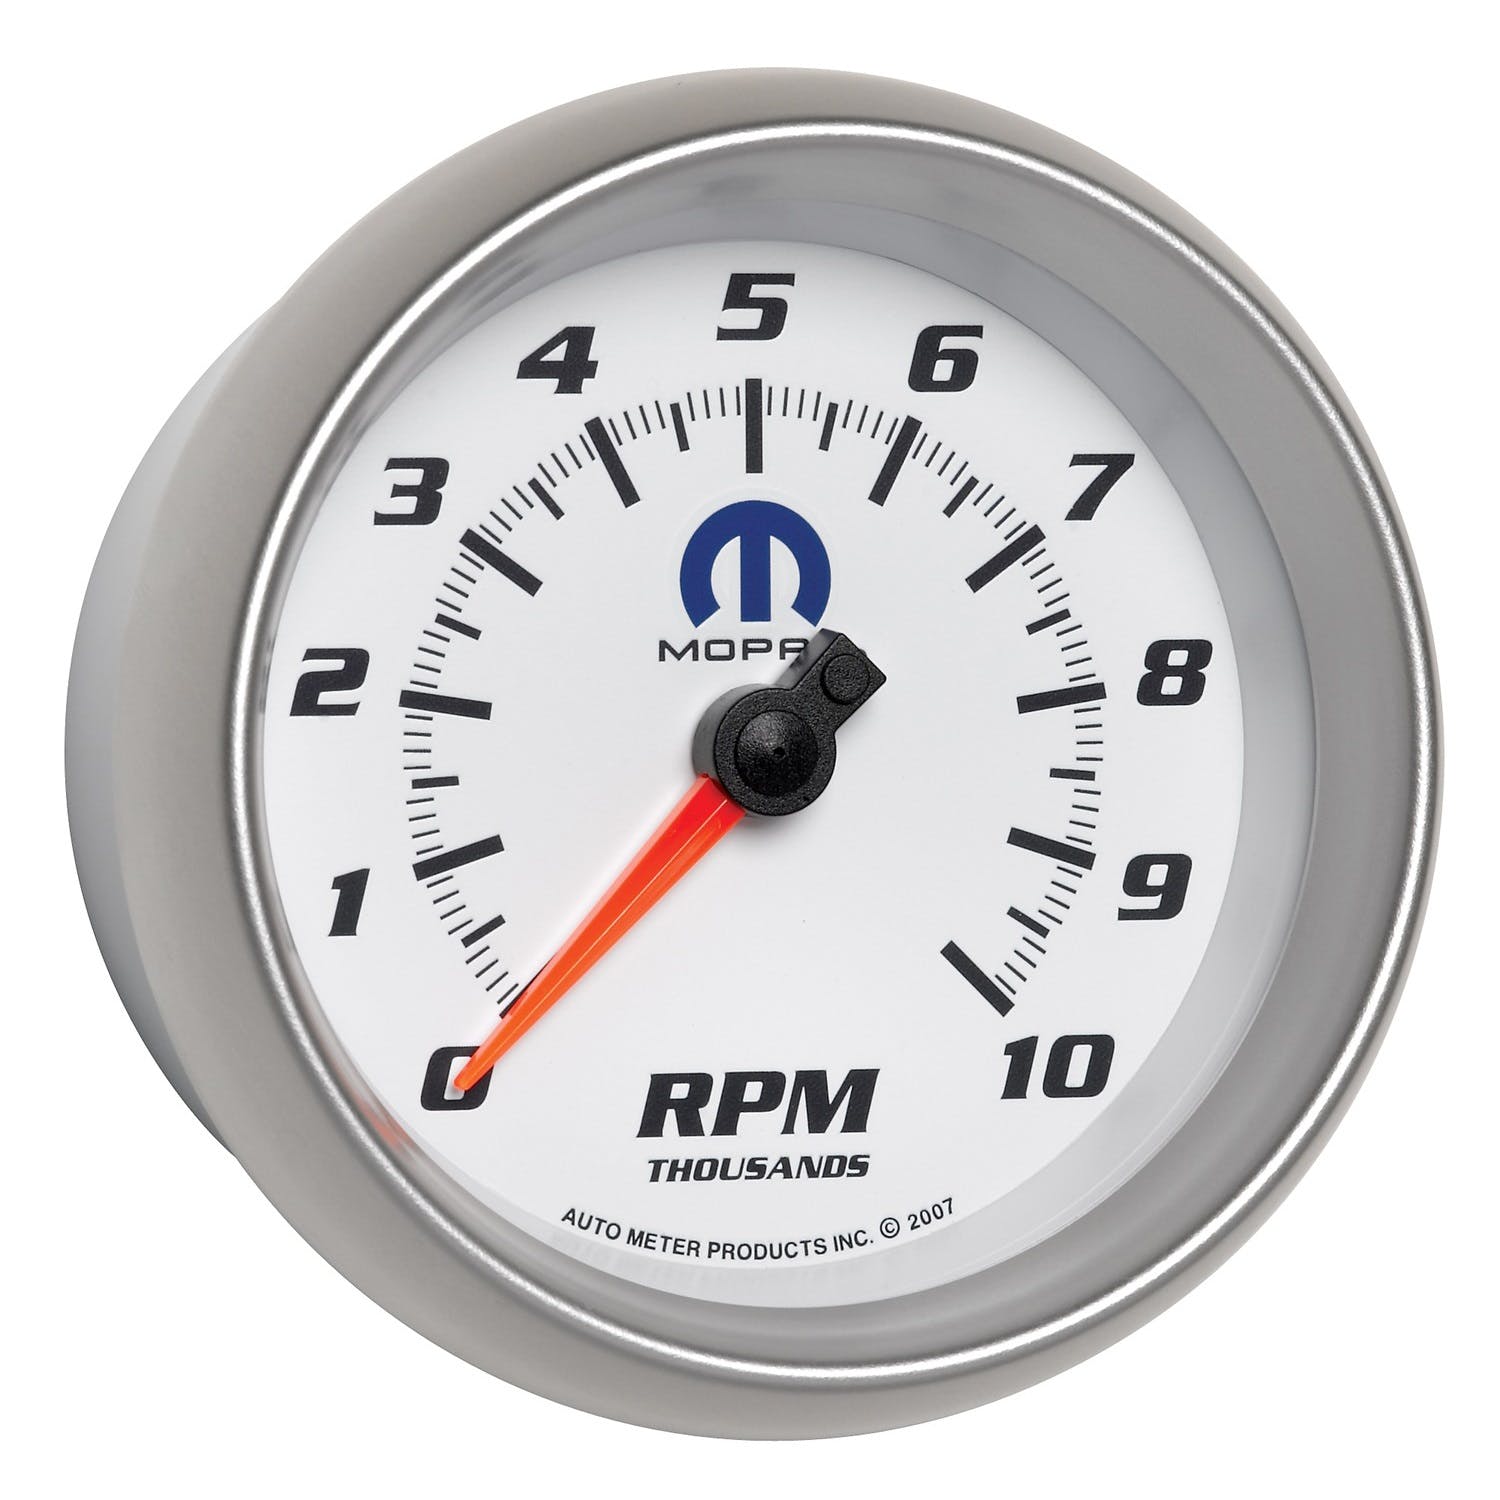 AutoMeter Products 880038 MOPAR”¬« Tachometer 3 3/8 in. 10000 RPM w/Points Electronic And Most 12 Volt High